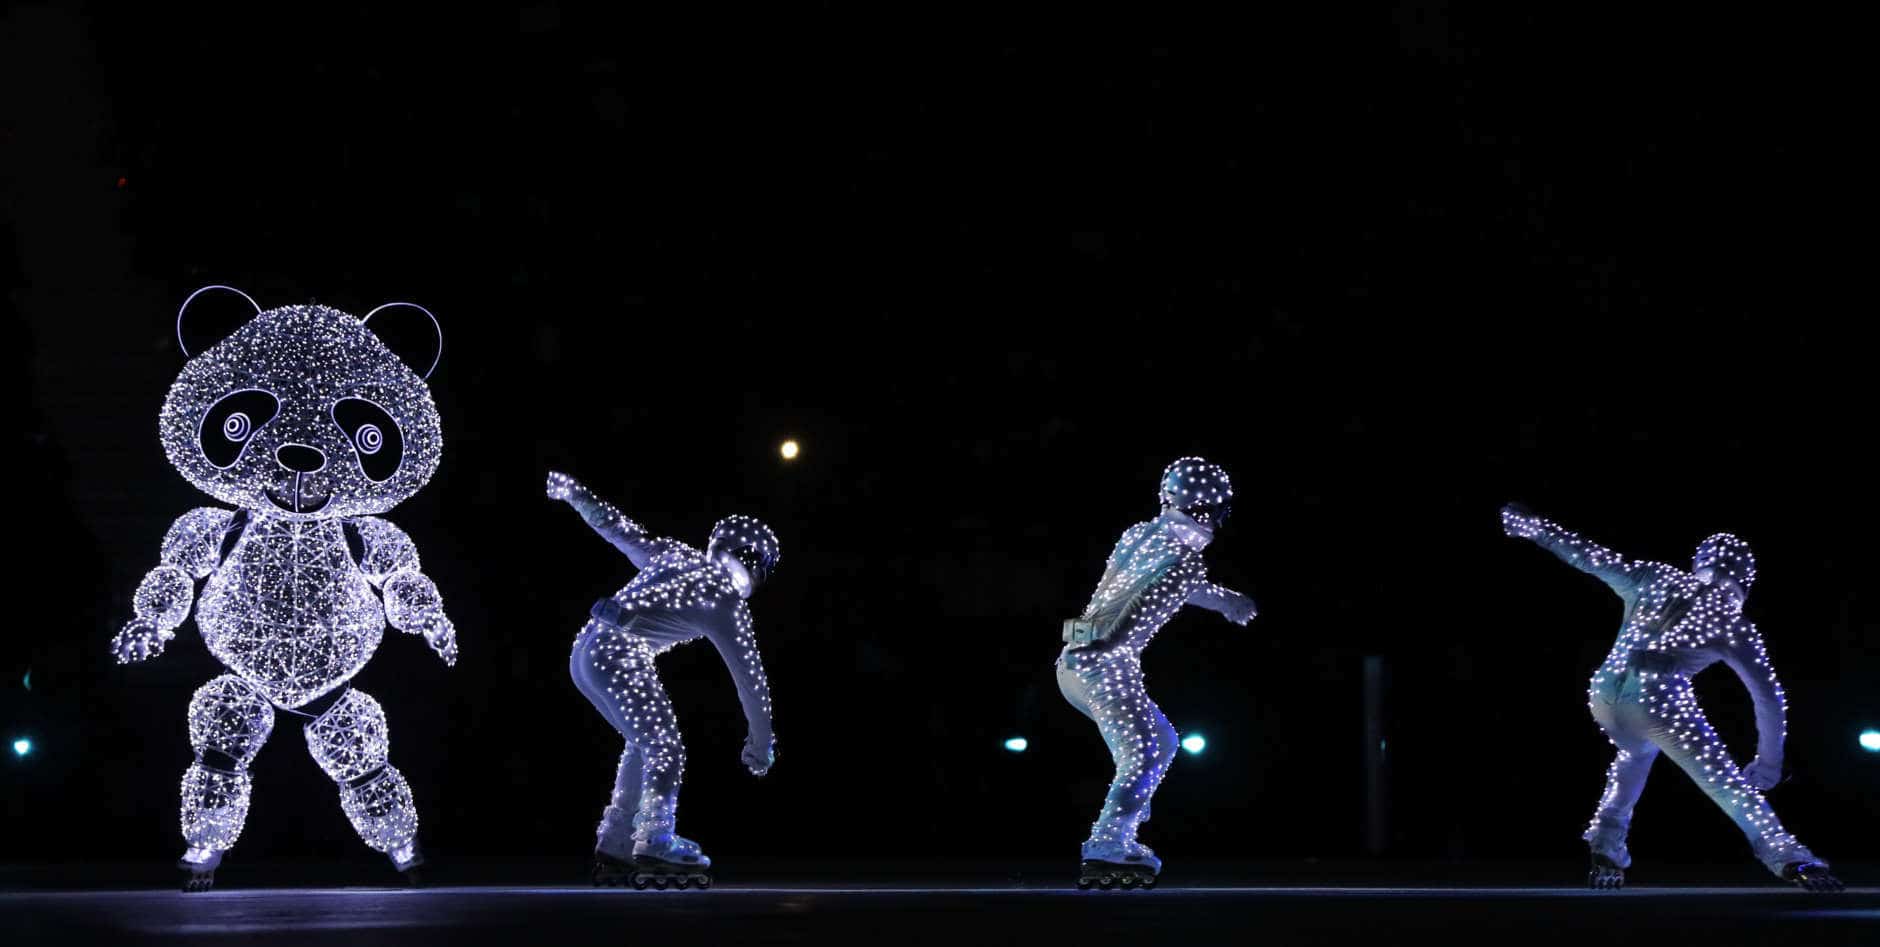 Performers participate in the closing ceremony of the 2018 Winter Olympics in Pyeongchang, South Korea, Sunday, Feb. 25, 2018. (AP Photo/Kirsty Wigglesworth)